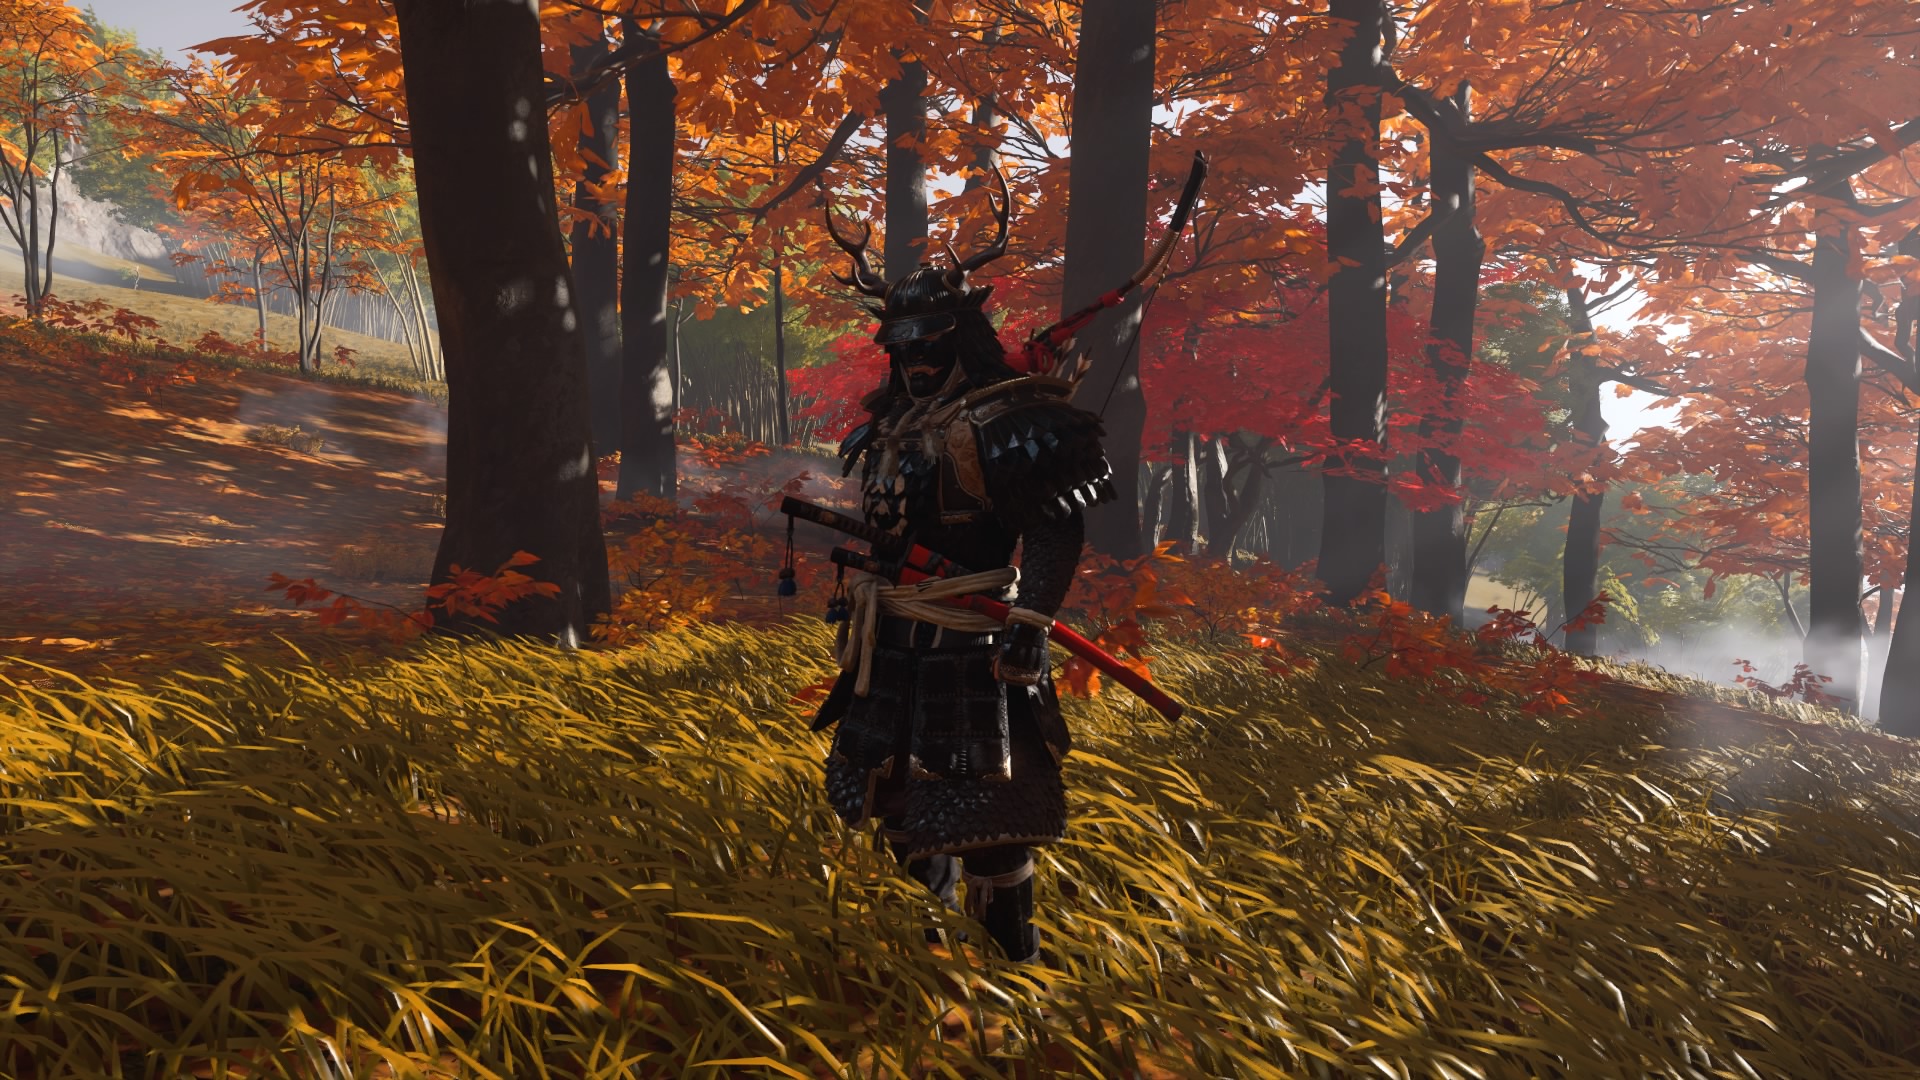 Ghost Of Tsushima Legends: 10 Tips For Bettering Your Favorite Class